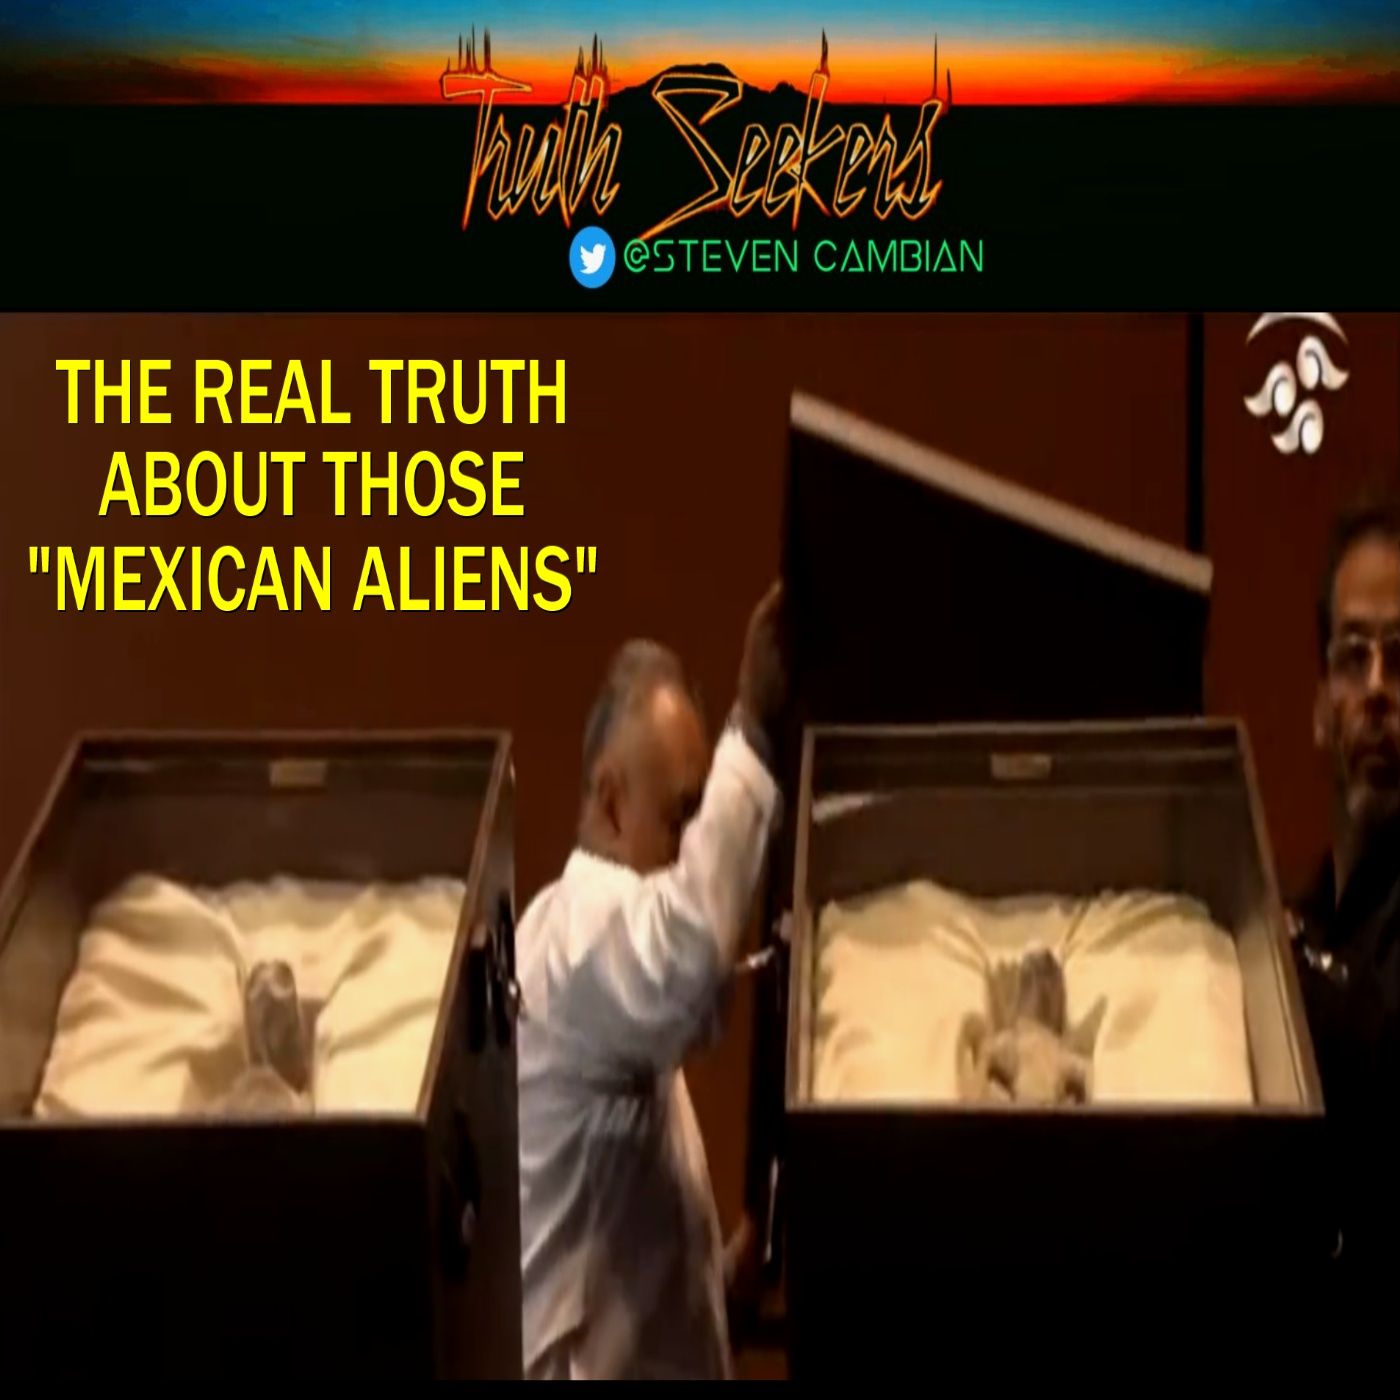 Alien bodies in Mexico? The REAL TRUTH about those "MEXICAN ALIENS"!